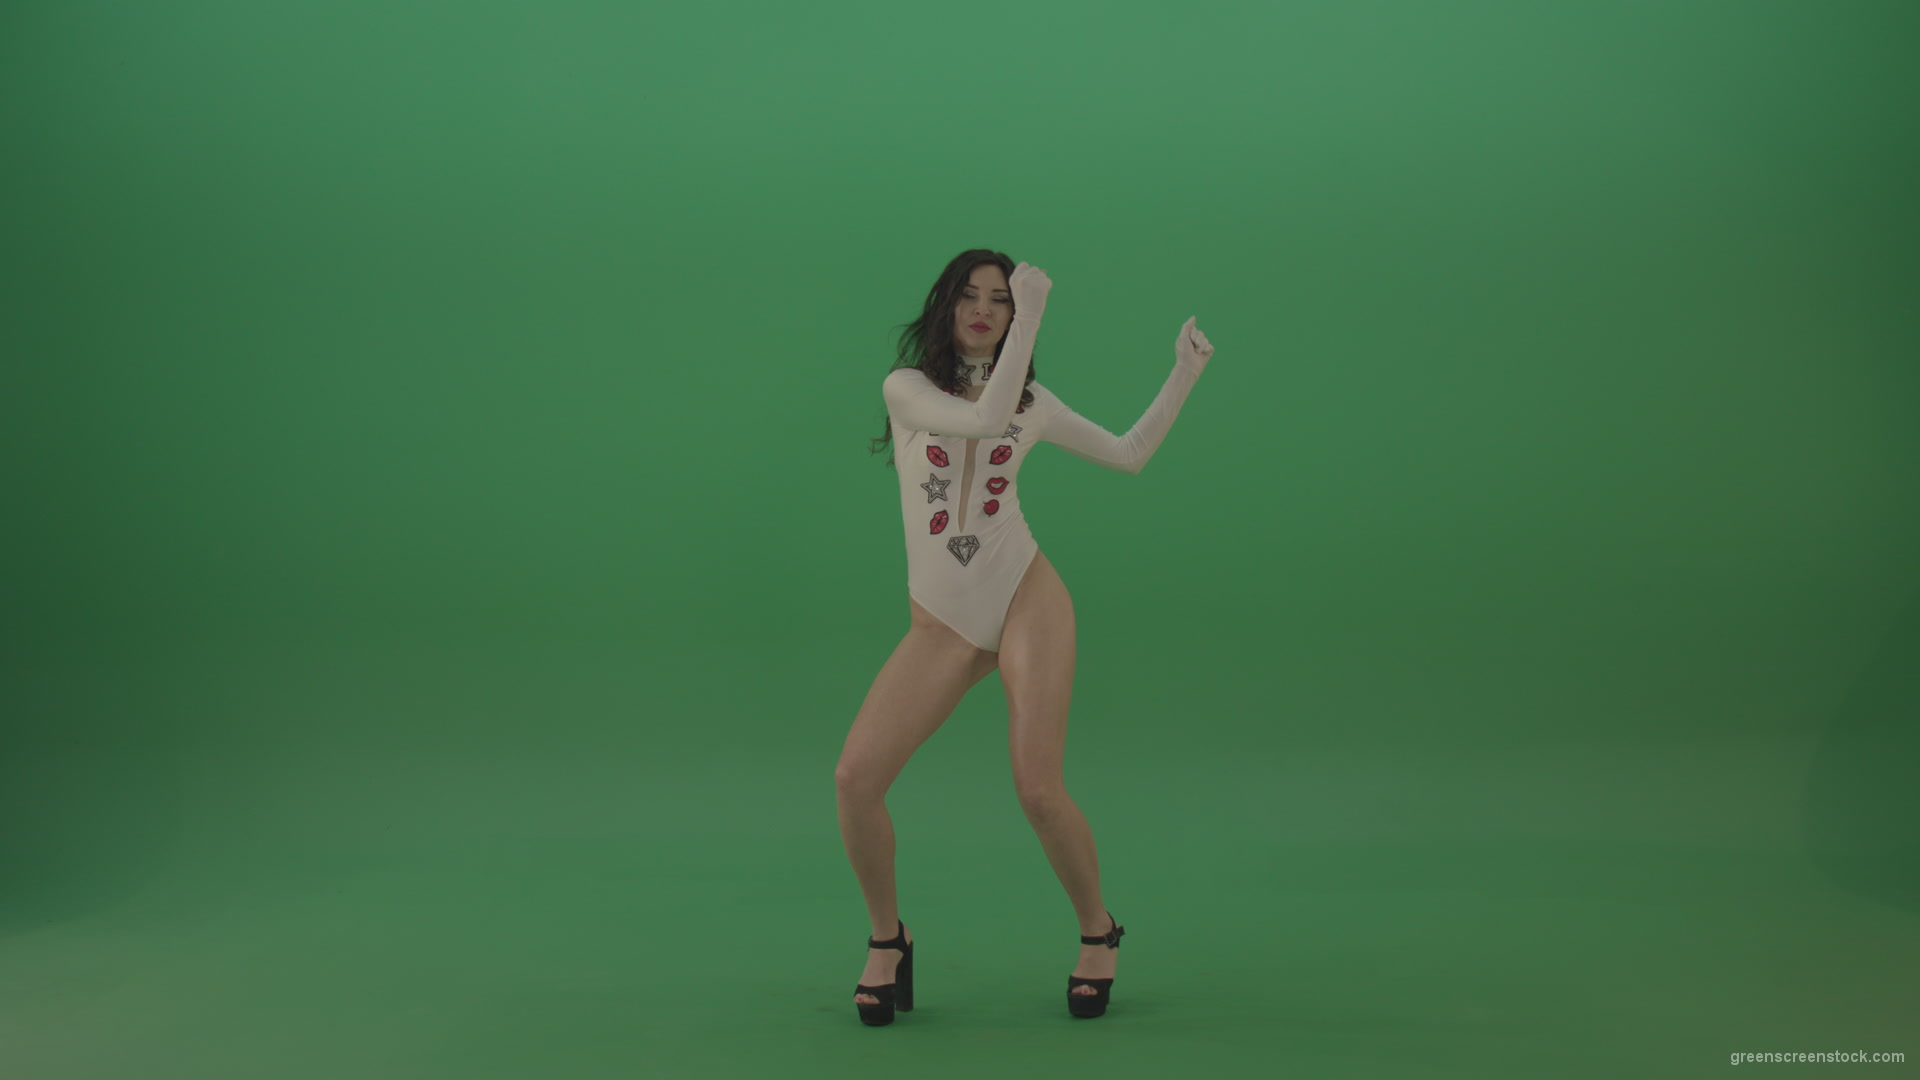 Sexy-woman-in-white-body-seductive-dance-on-green-background_007 Green Screen Stock